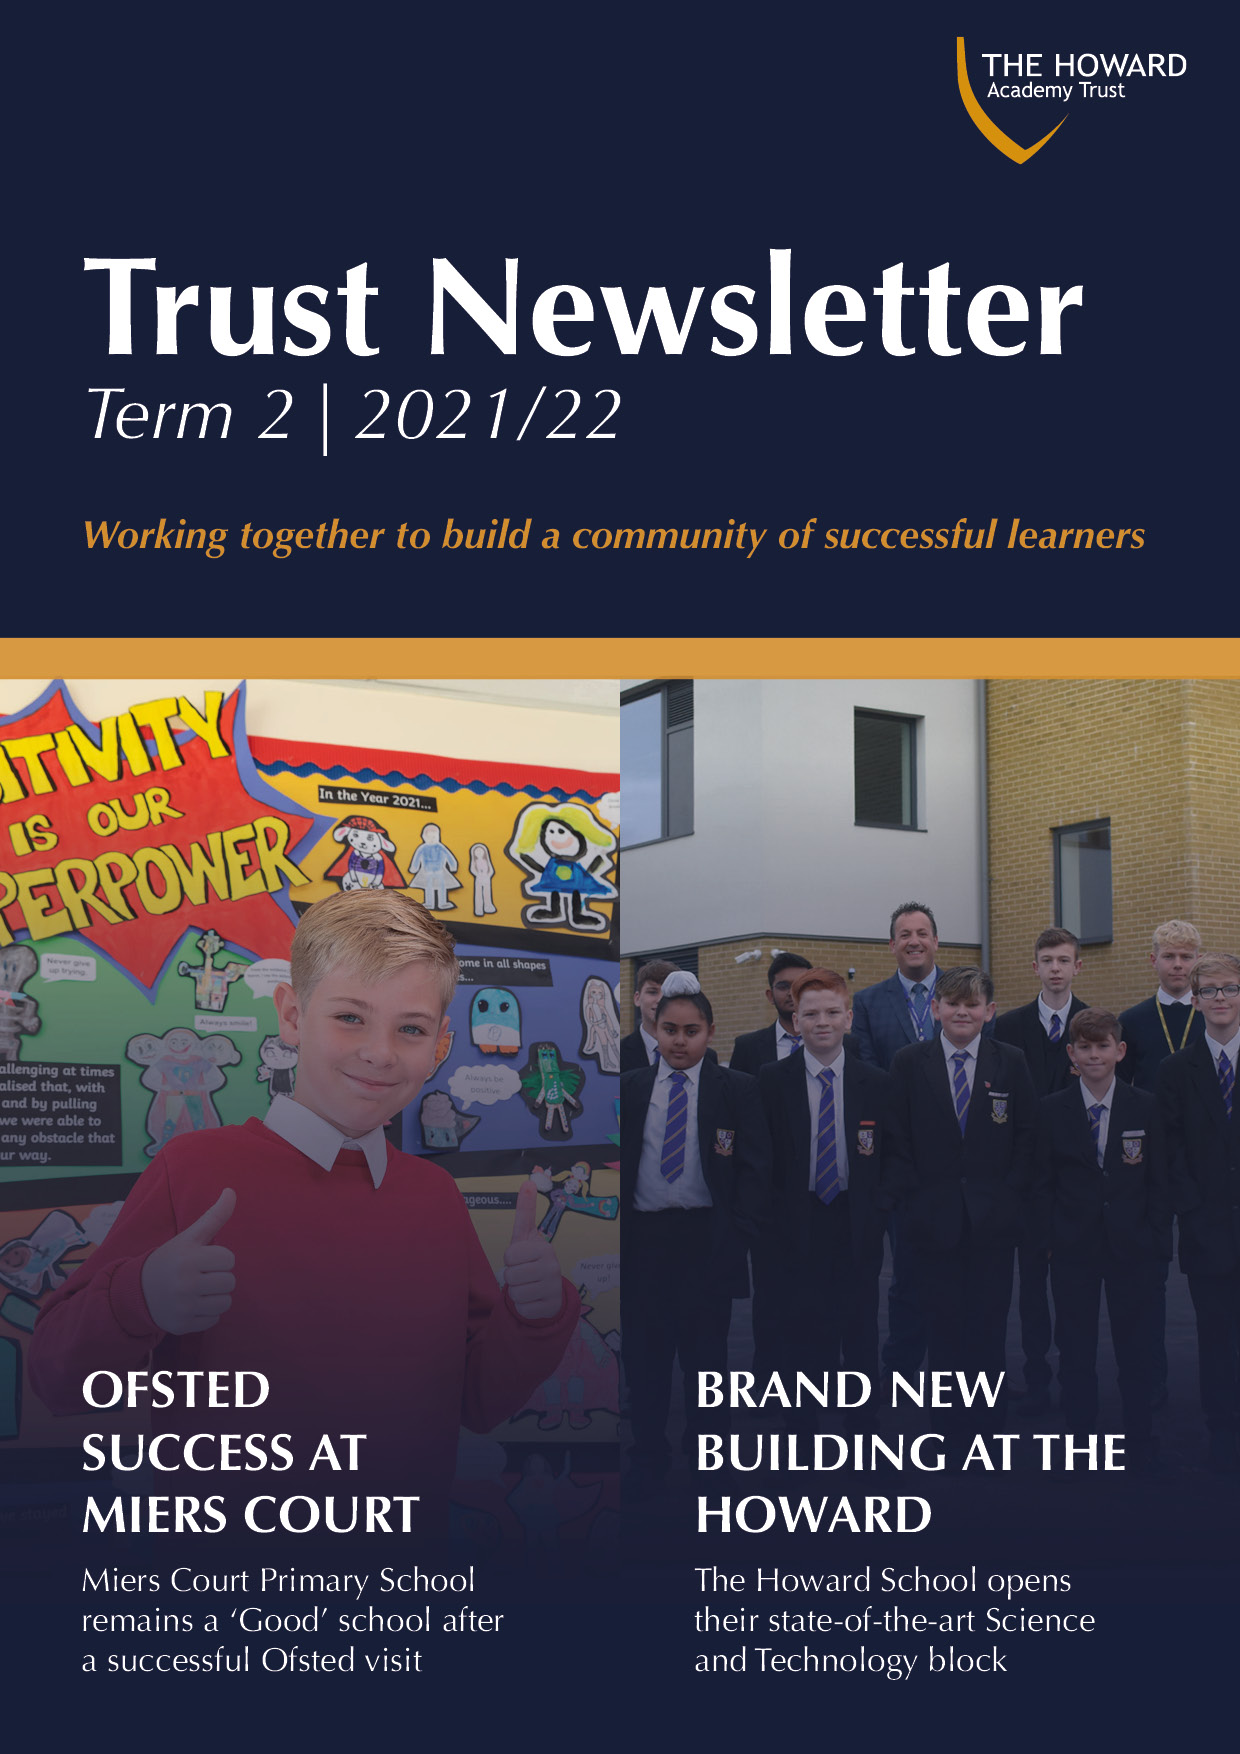 The front page of a Trust Newsletter.